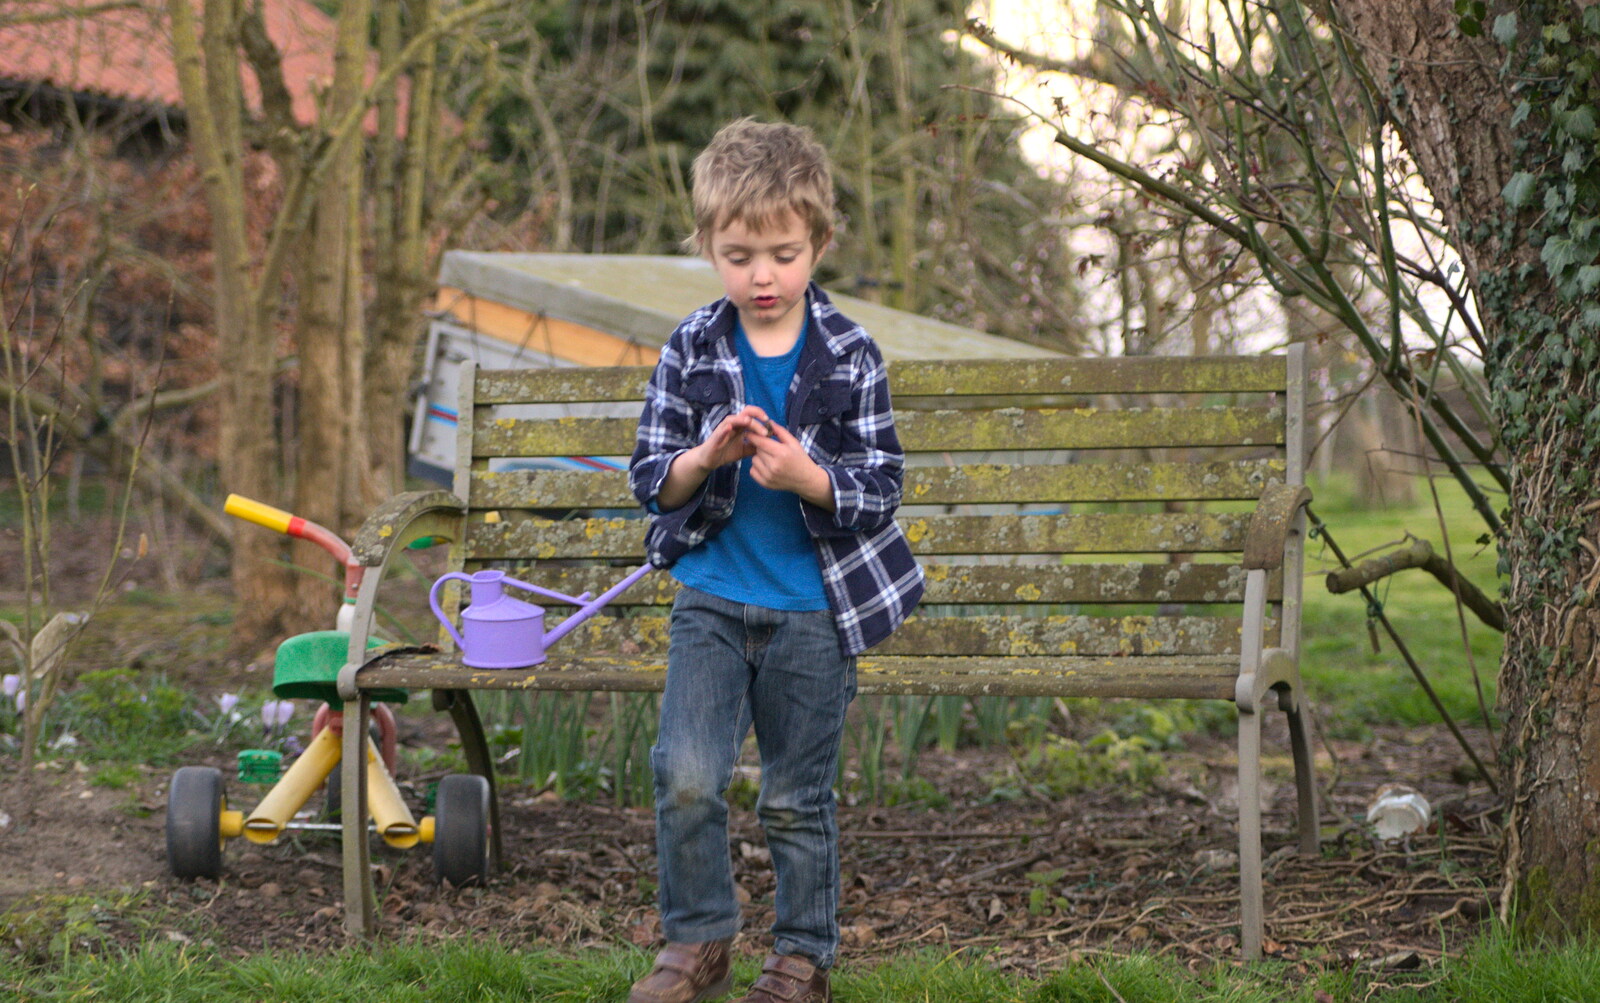 Fred pokes around with a walnut shell from Emily Comes to Visit, Brome, Suffolk - 15th March 2014